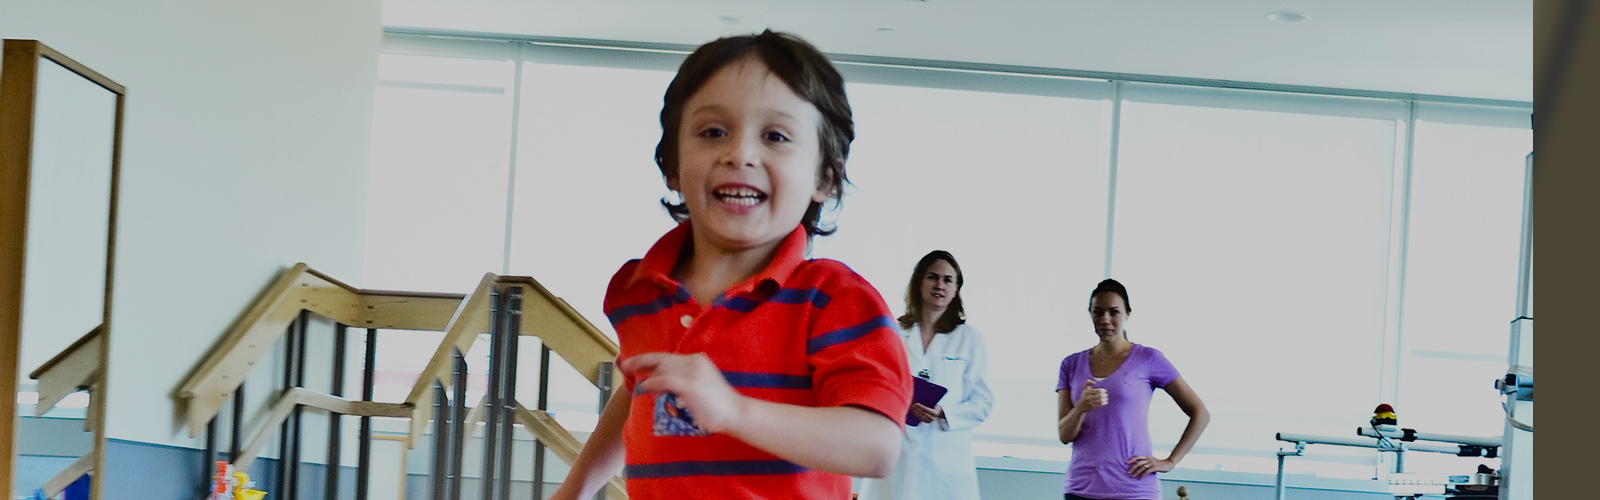 A child running and smiling with doctors watching in the background.